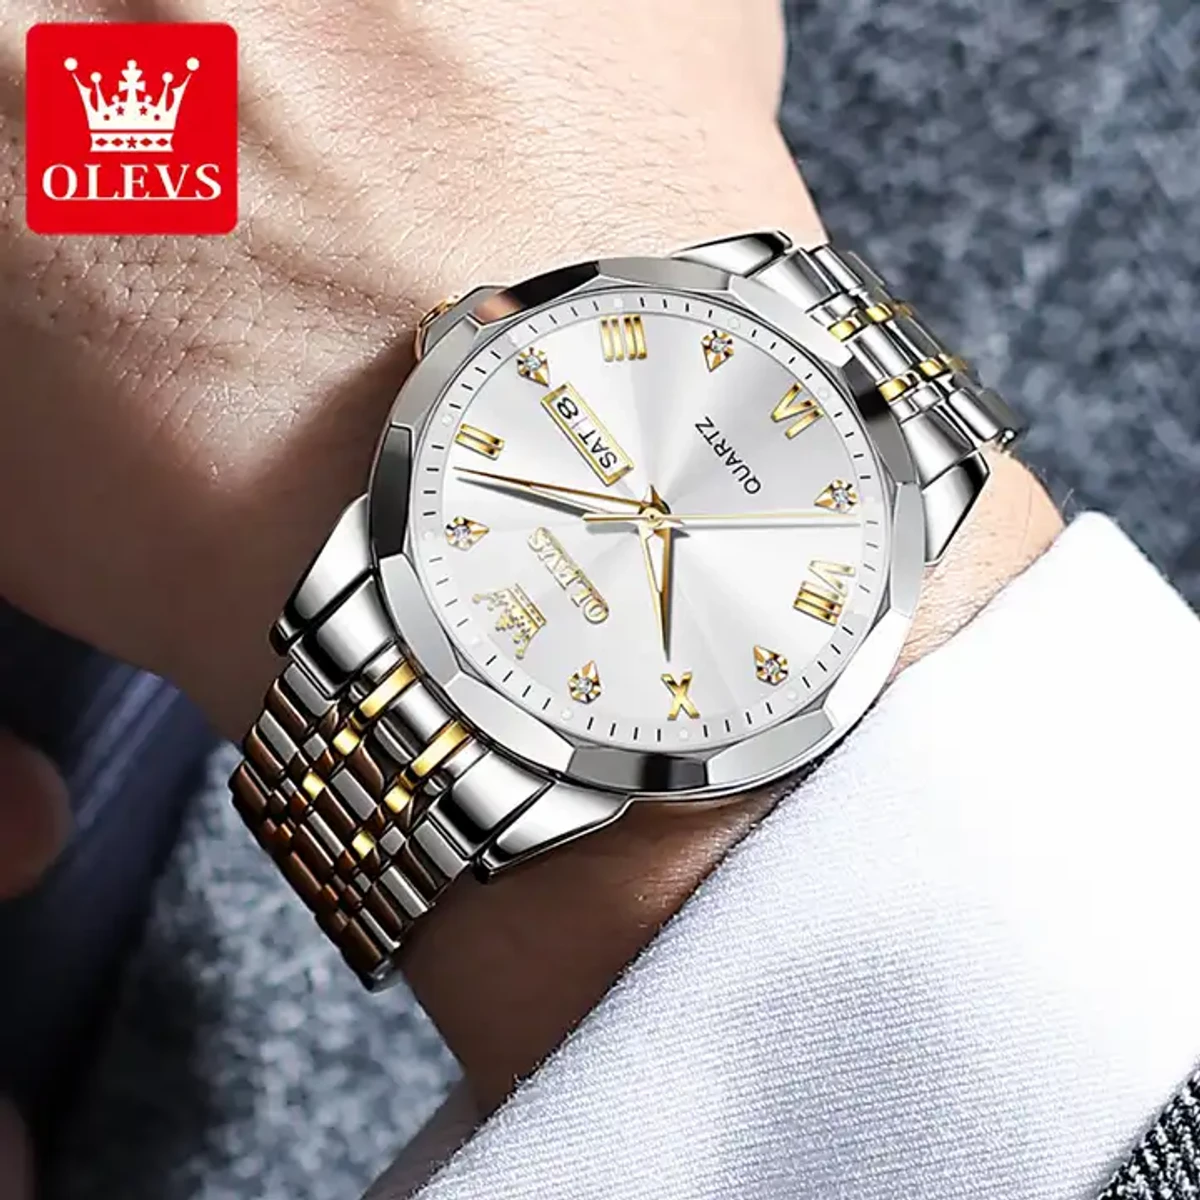 OLEVS MODEL 9931 Watch for Men Stainless Steel Watches - 9941 TOTON AR DIAL WHITE - MAN WATCH - LOCK PUSH